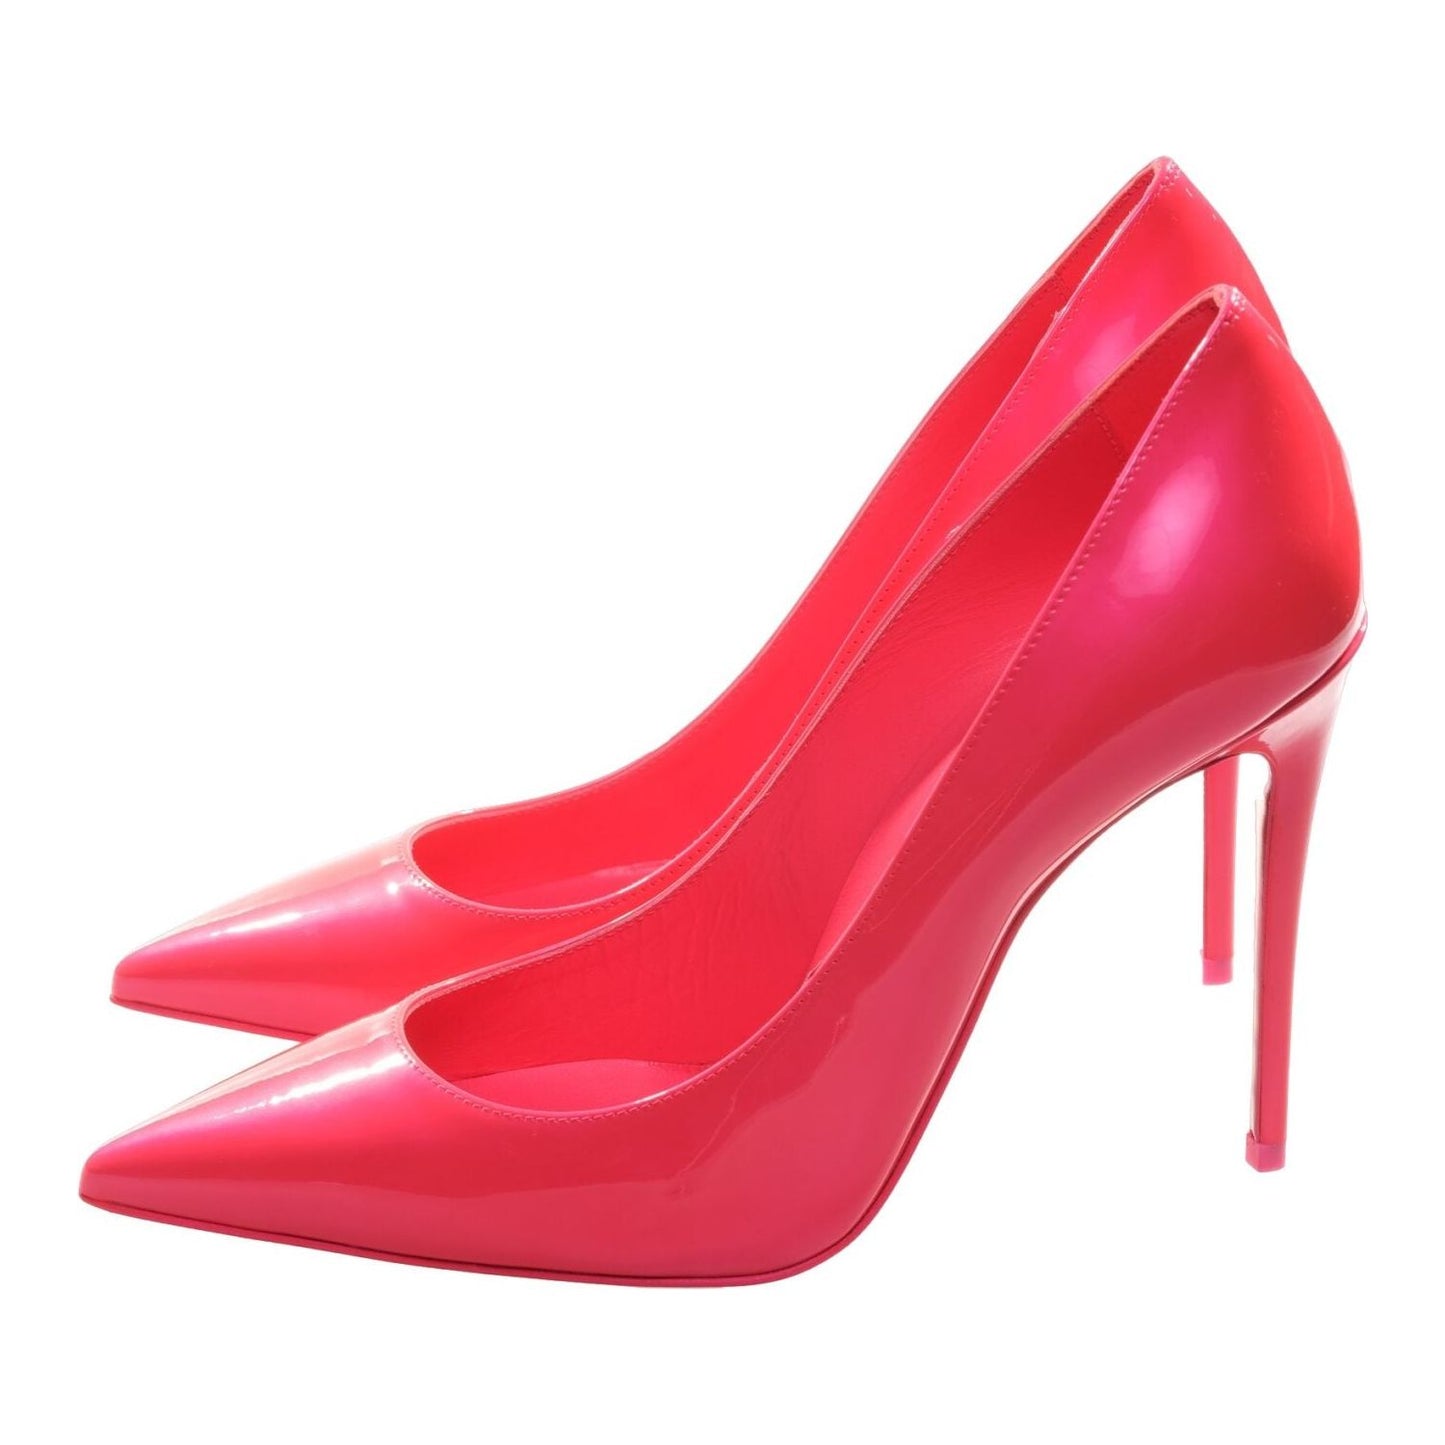 Sporty Kate Hot Pink Patent Leather High Heel Pumps